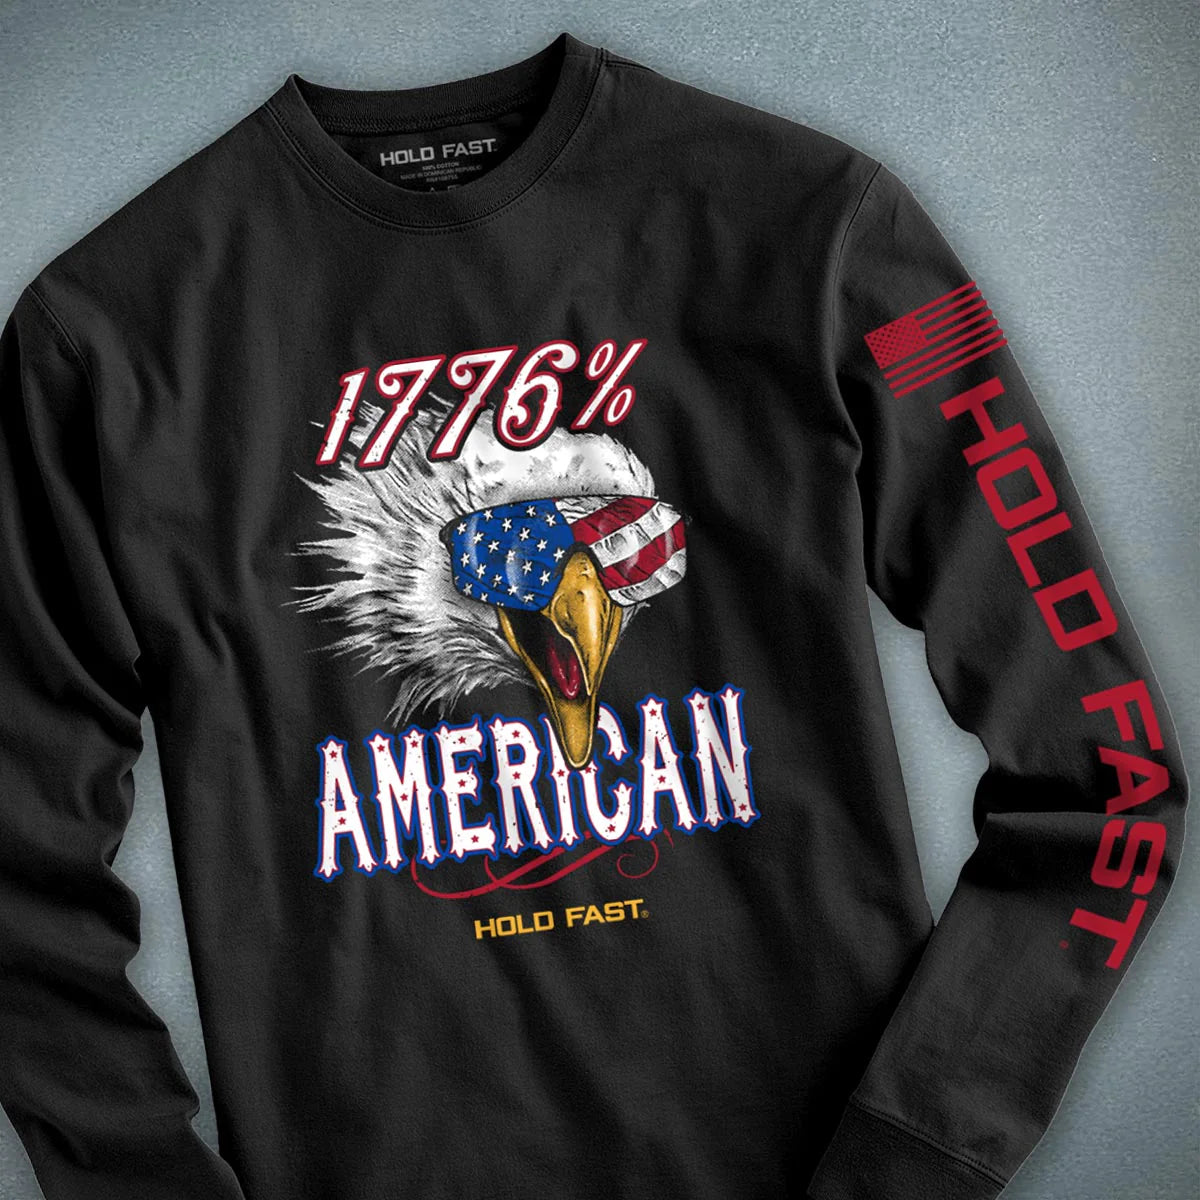 Hold Fast Unisex Long Sleeve Patriot T-Shirt 1776% American